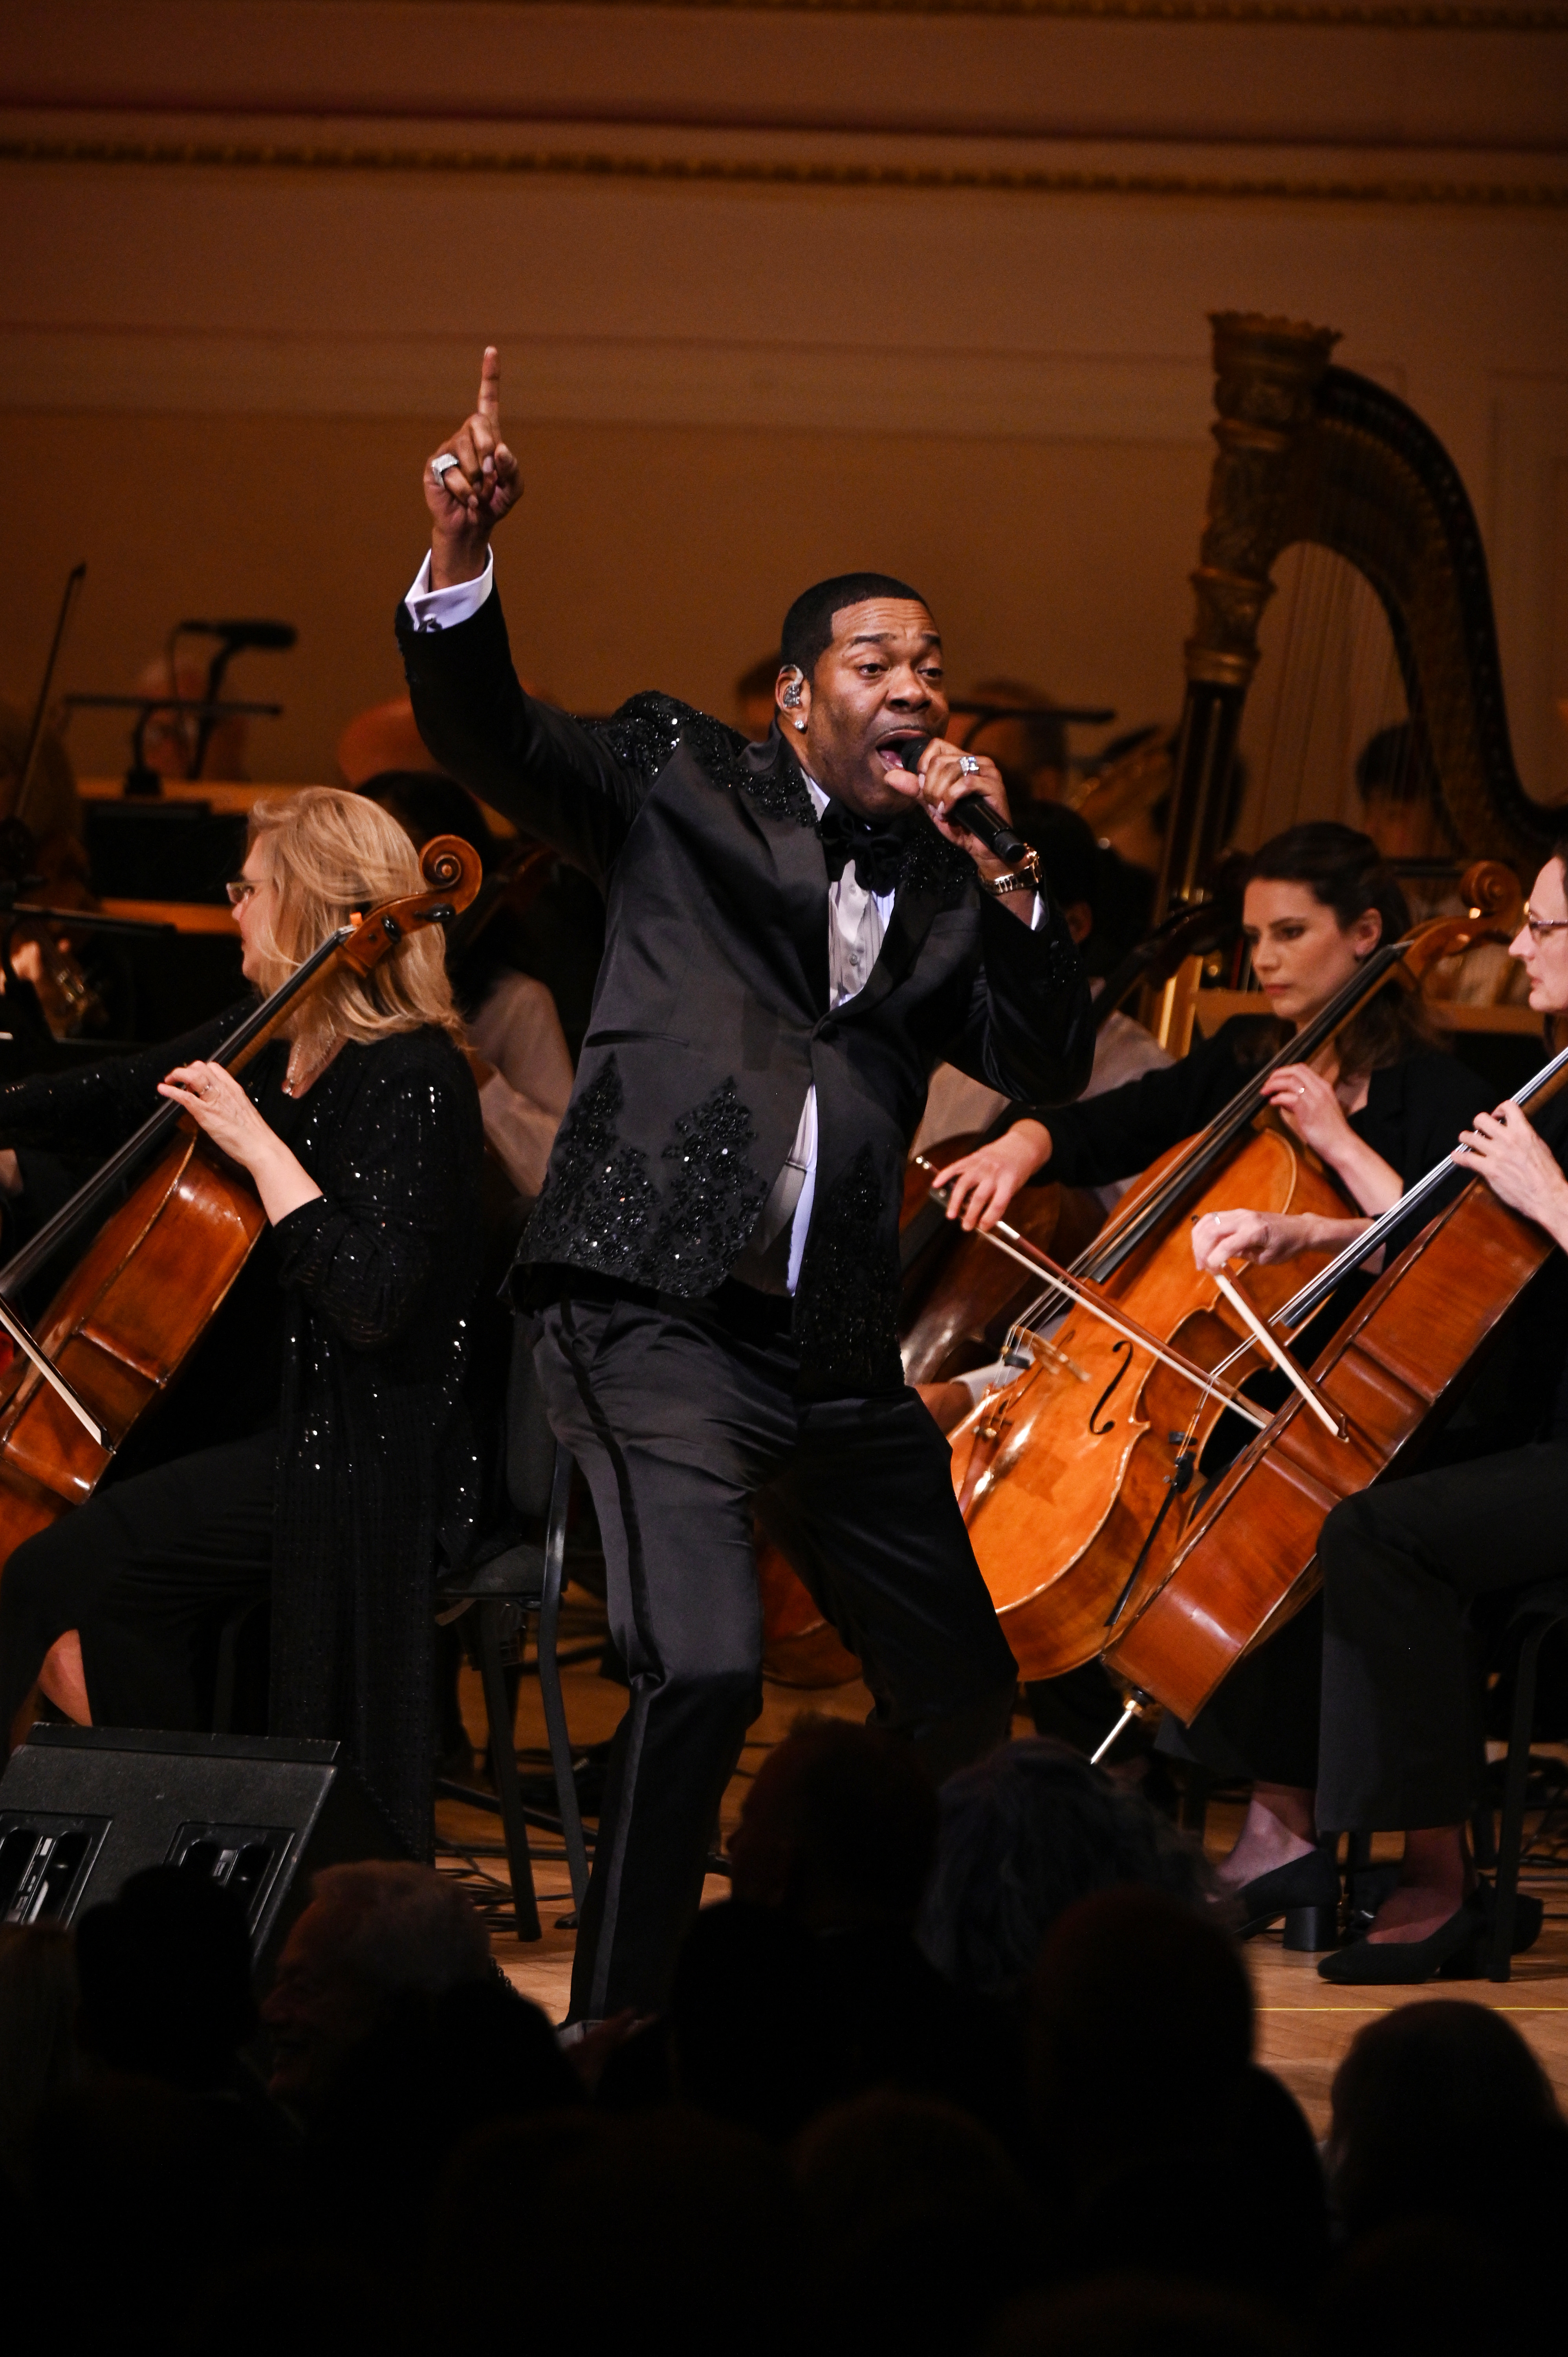 Busta Rhymes performing in front of an orchestra, wearing a formal black suit with shimmering accents, passionately singing into a microphone